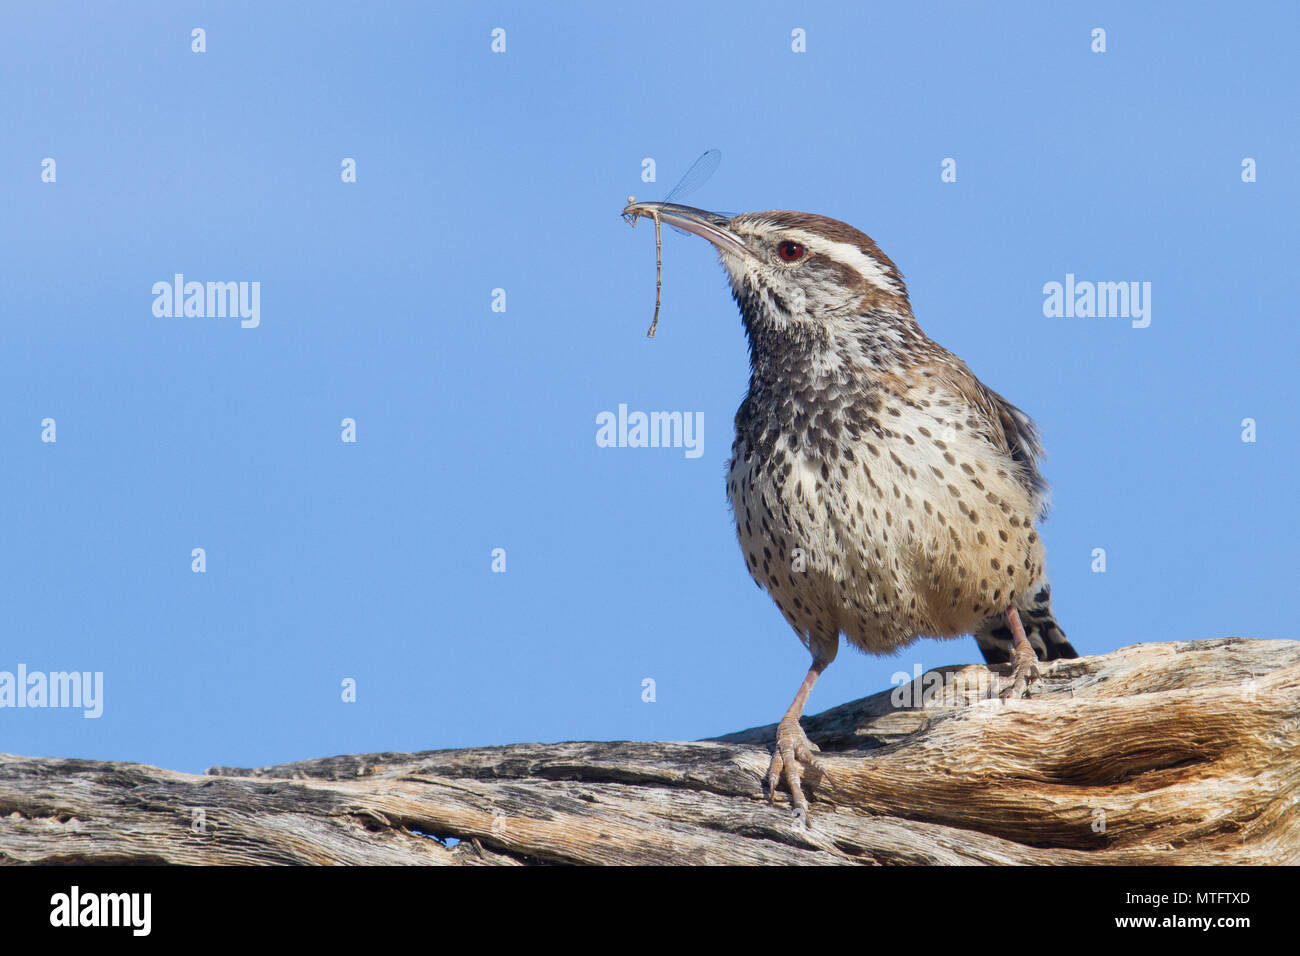 A cactus wren preying on a damsel fly in the Sonoran Desert of Arizona, USA. Stock Photo